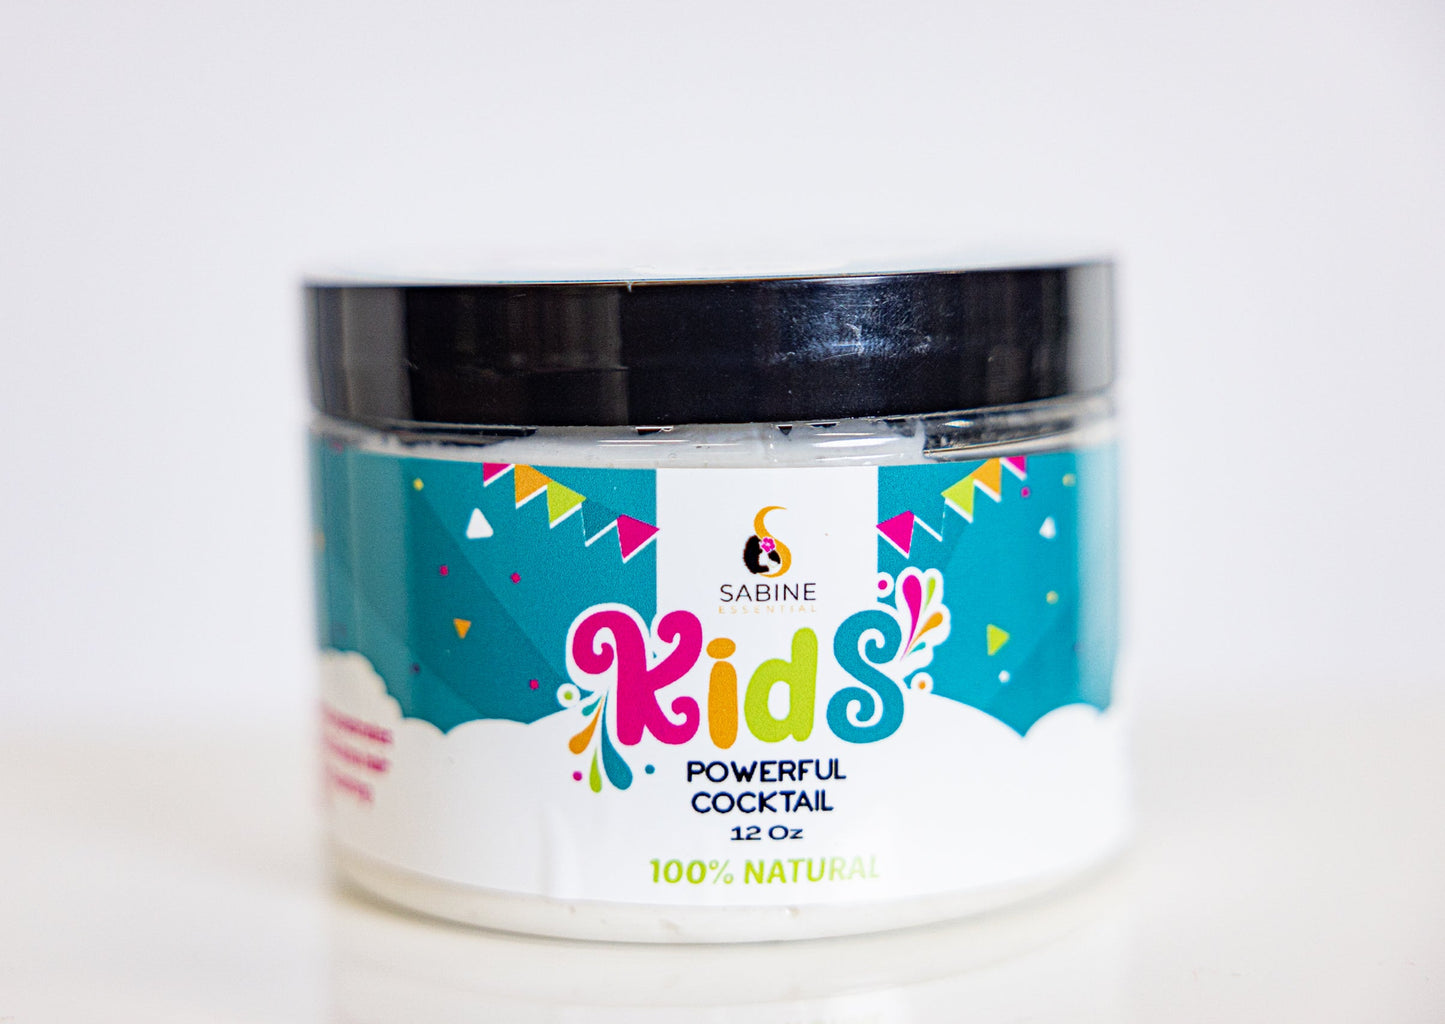 Kids Hair Care Bundle (Kids Bounce Conditioner & Kids Powerful Cocktail)